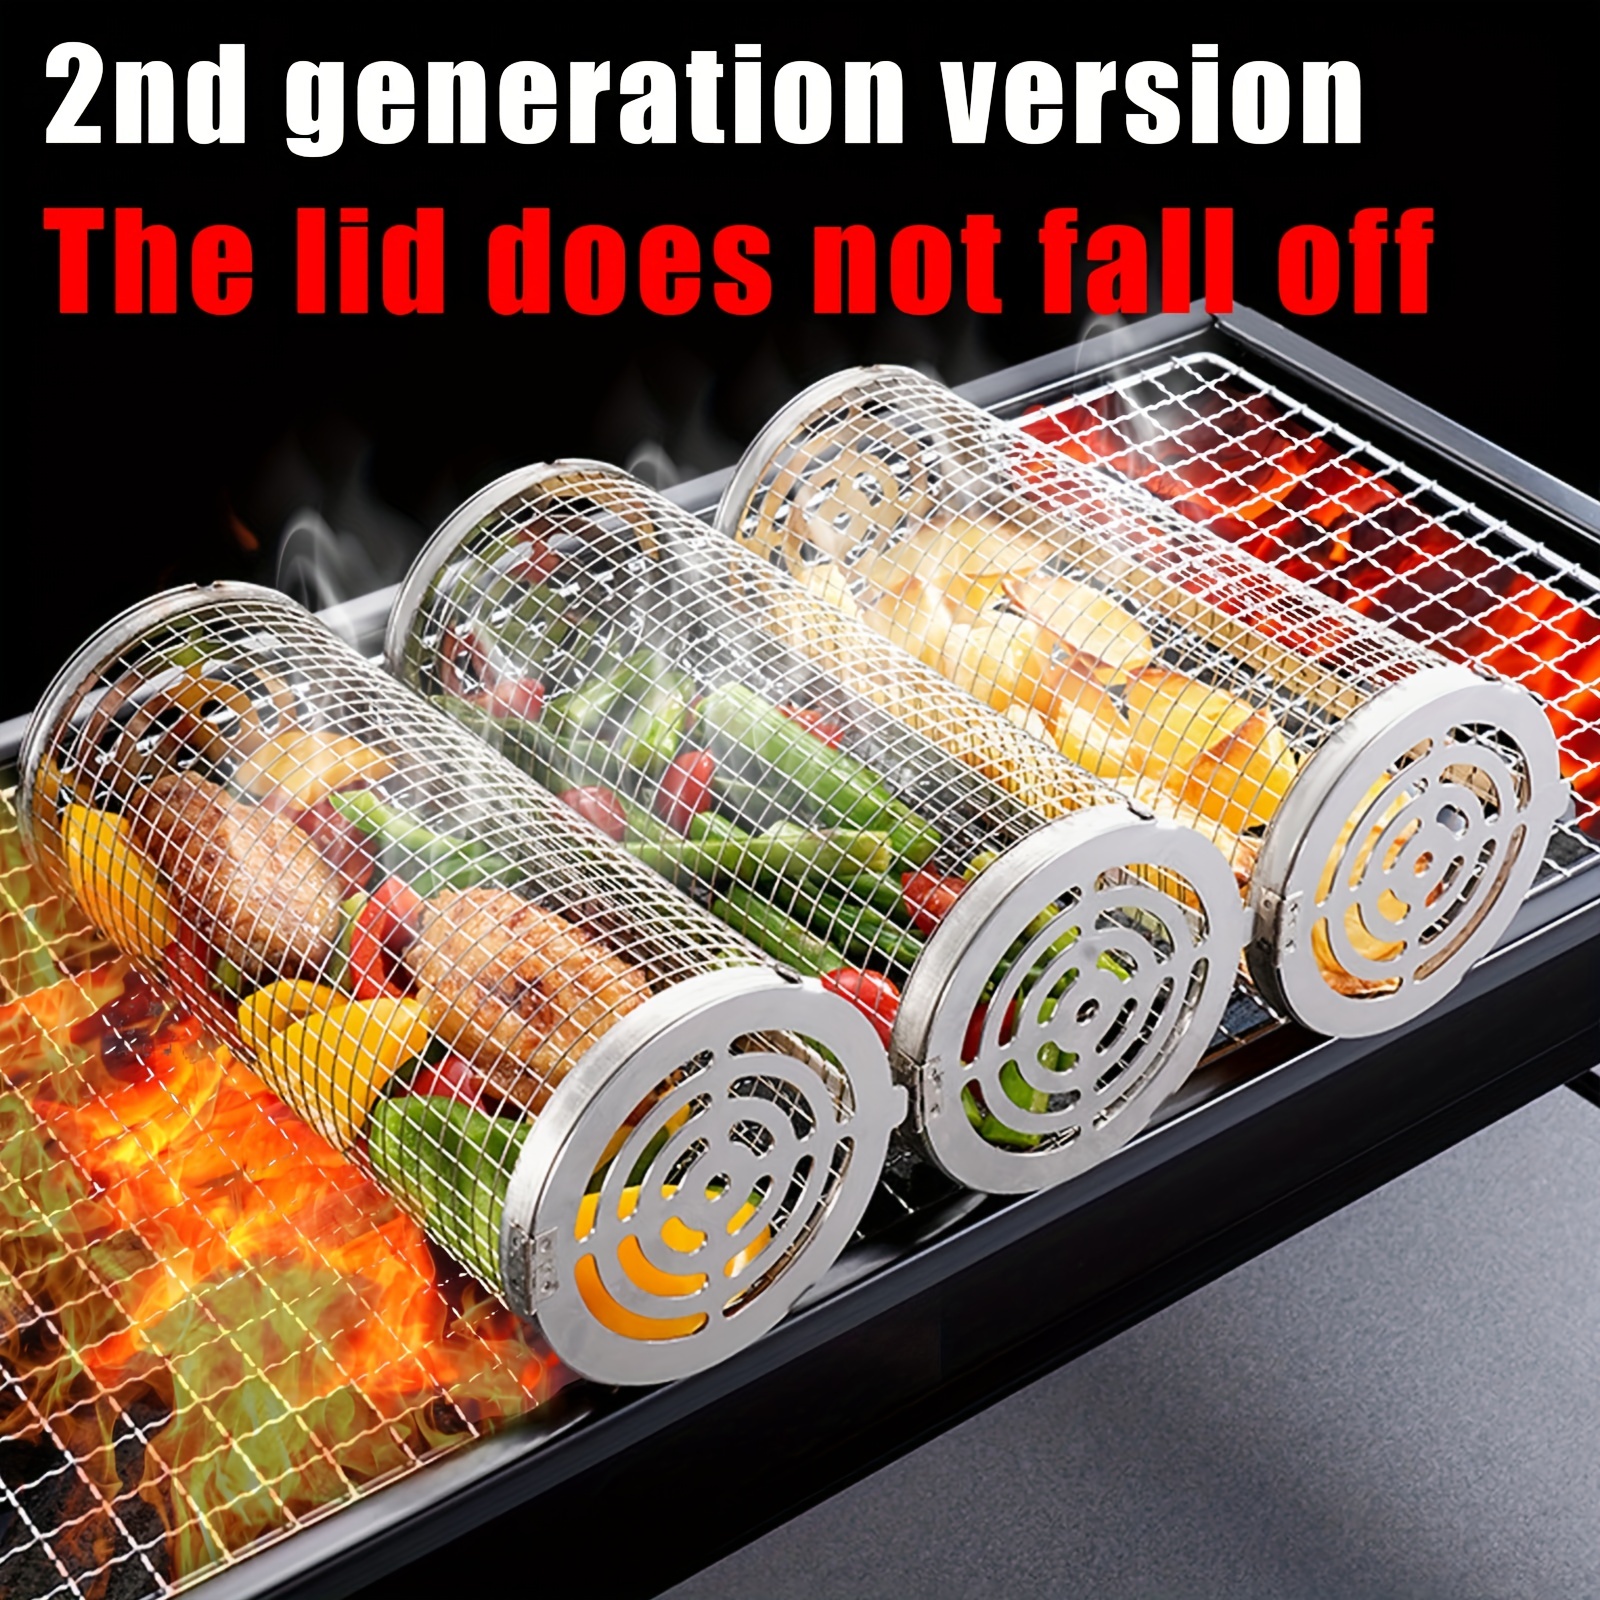 YIYIBYUS 15.94 in. Round Barbecue Grill Net Racks Stainless Steel